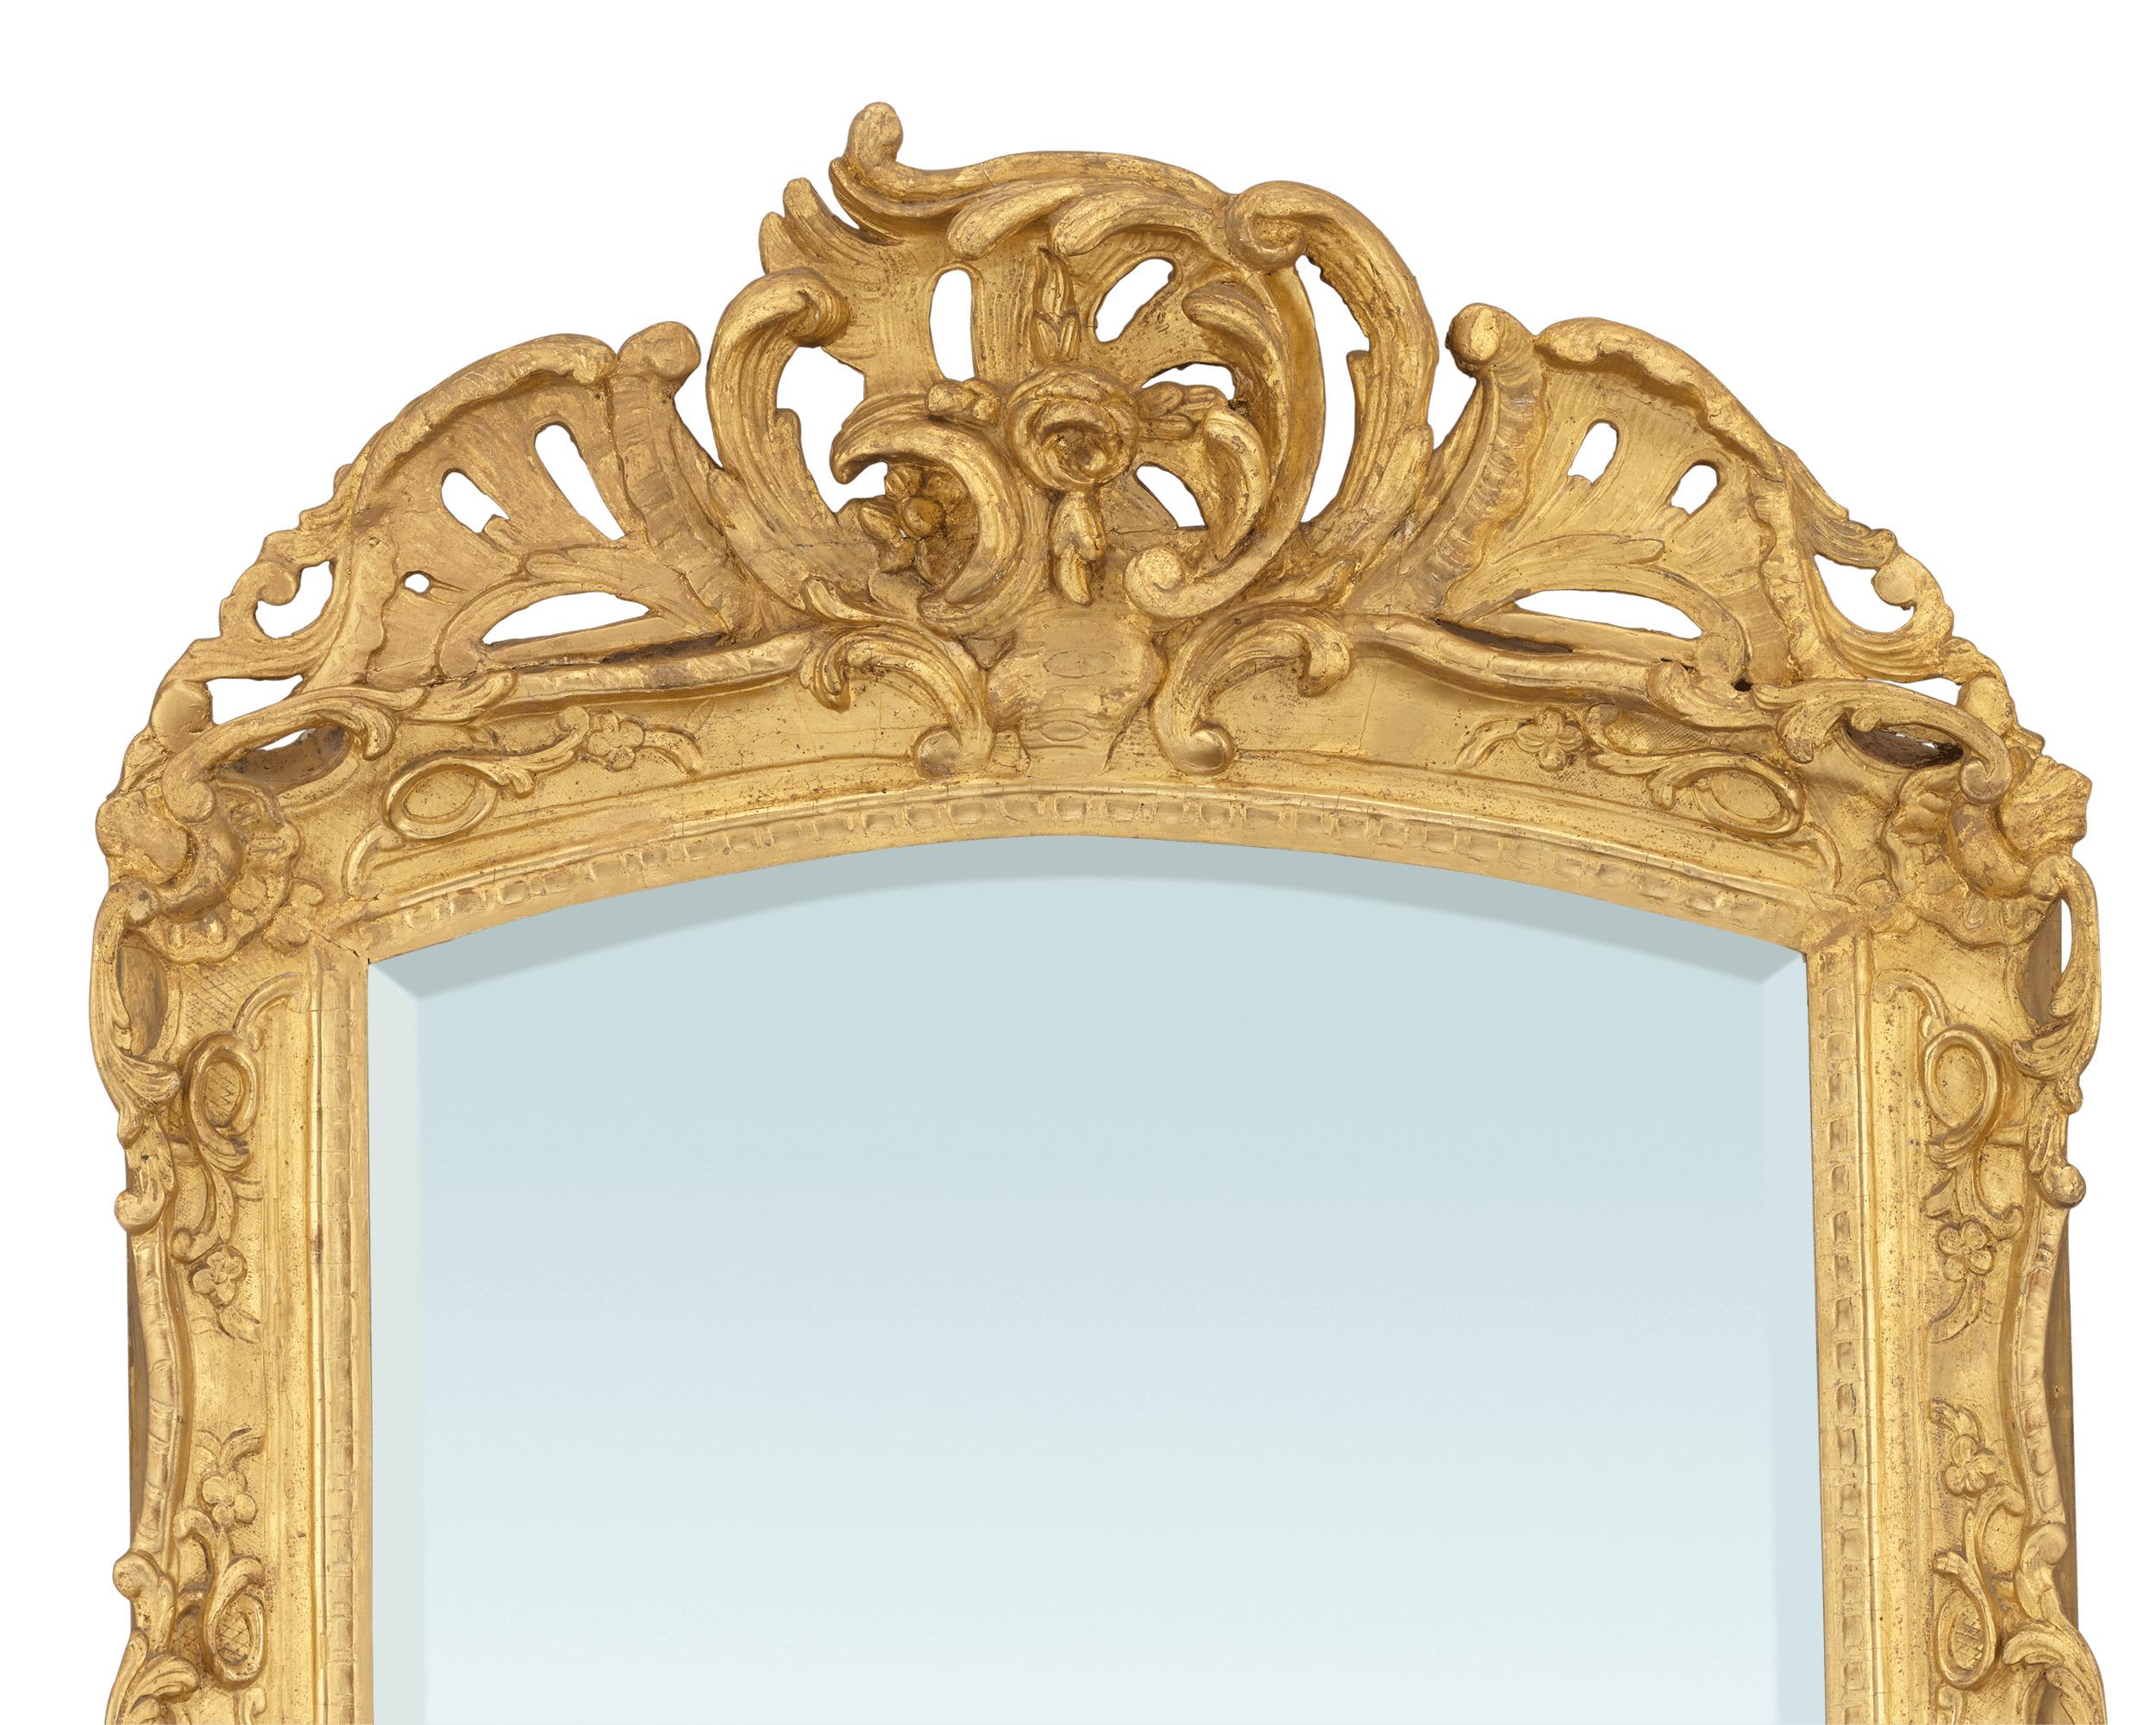 Commanding in size and artistry, this rare Louis XV-period gilt mirror is a tour-de-force of the era's highly ornamental, yet elegant style. The golden frame features sweeping, heavy scrolls and acanthus with floral and shell details that surround